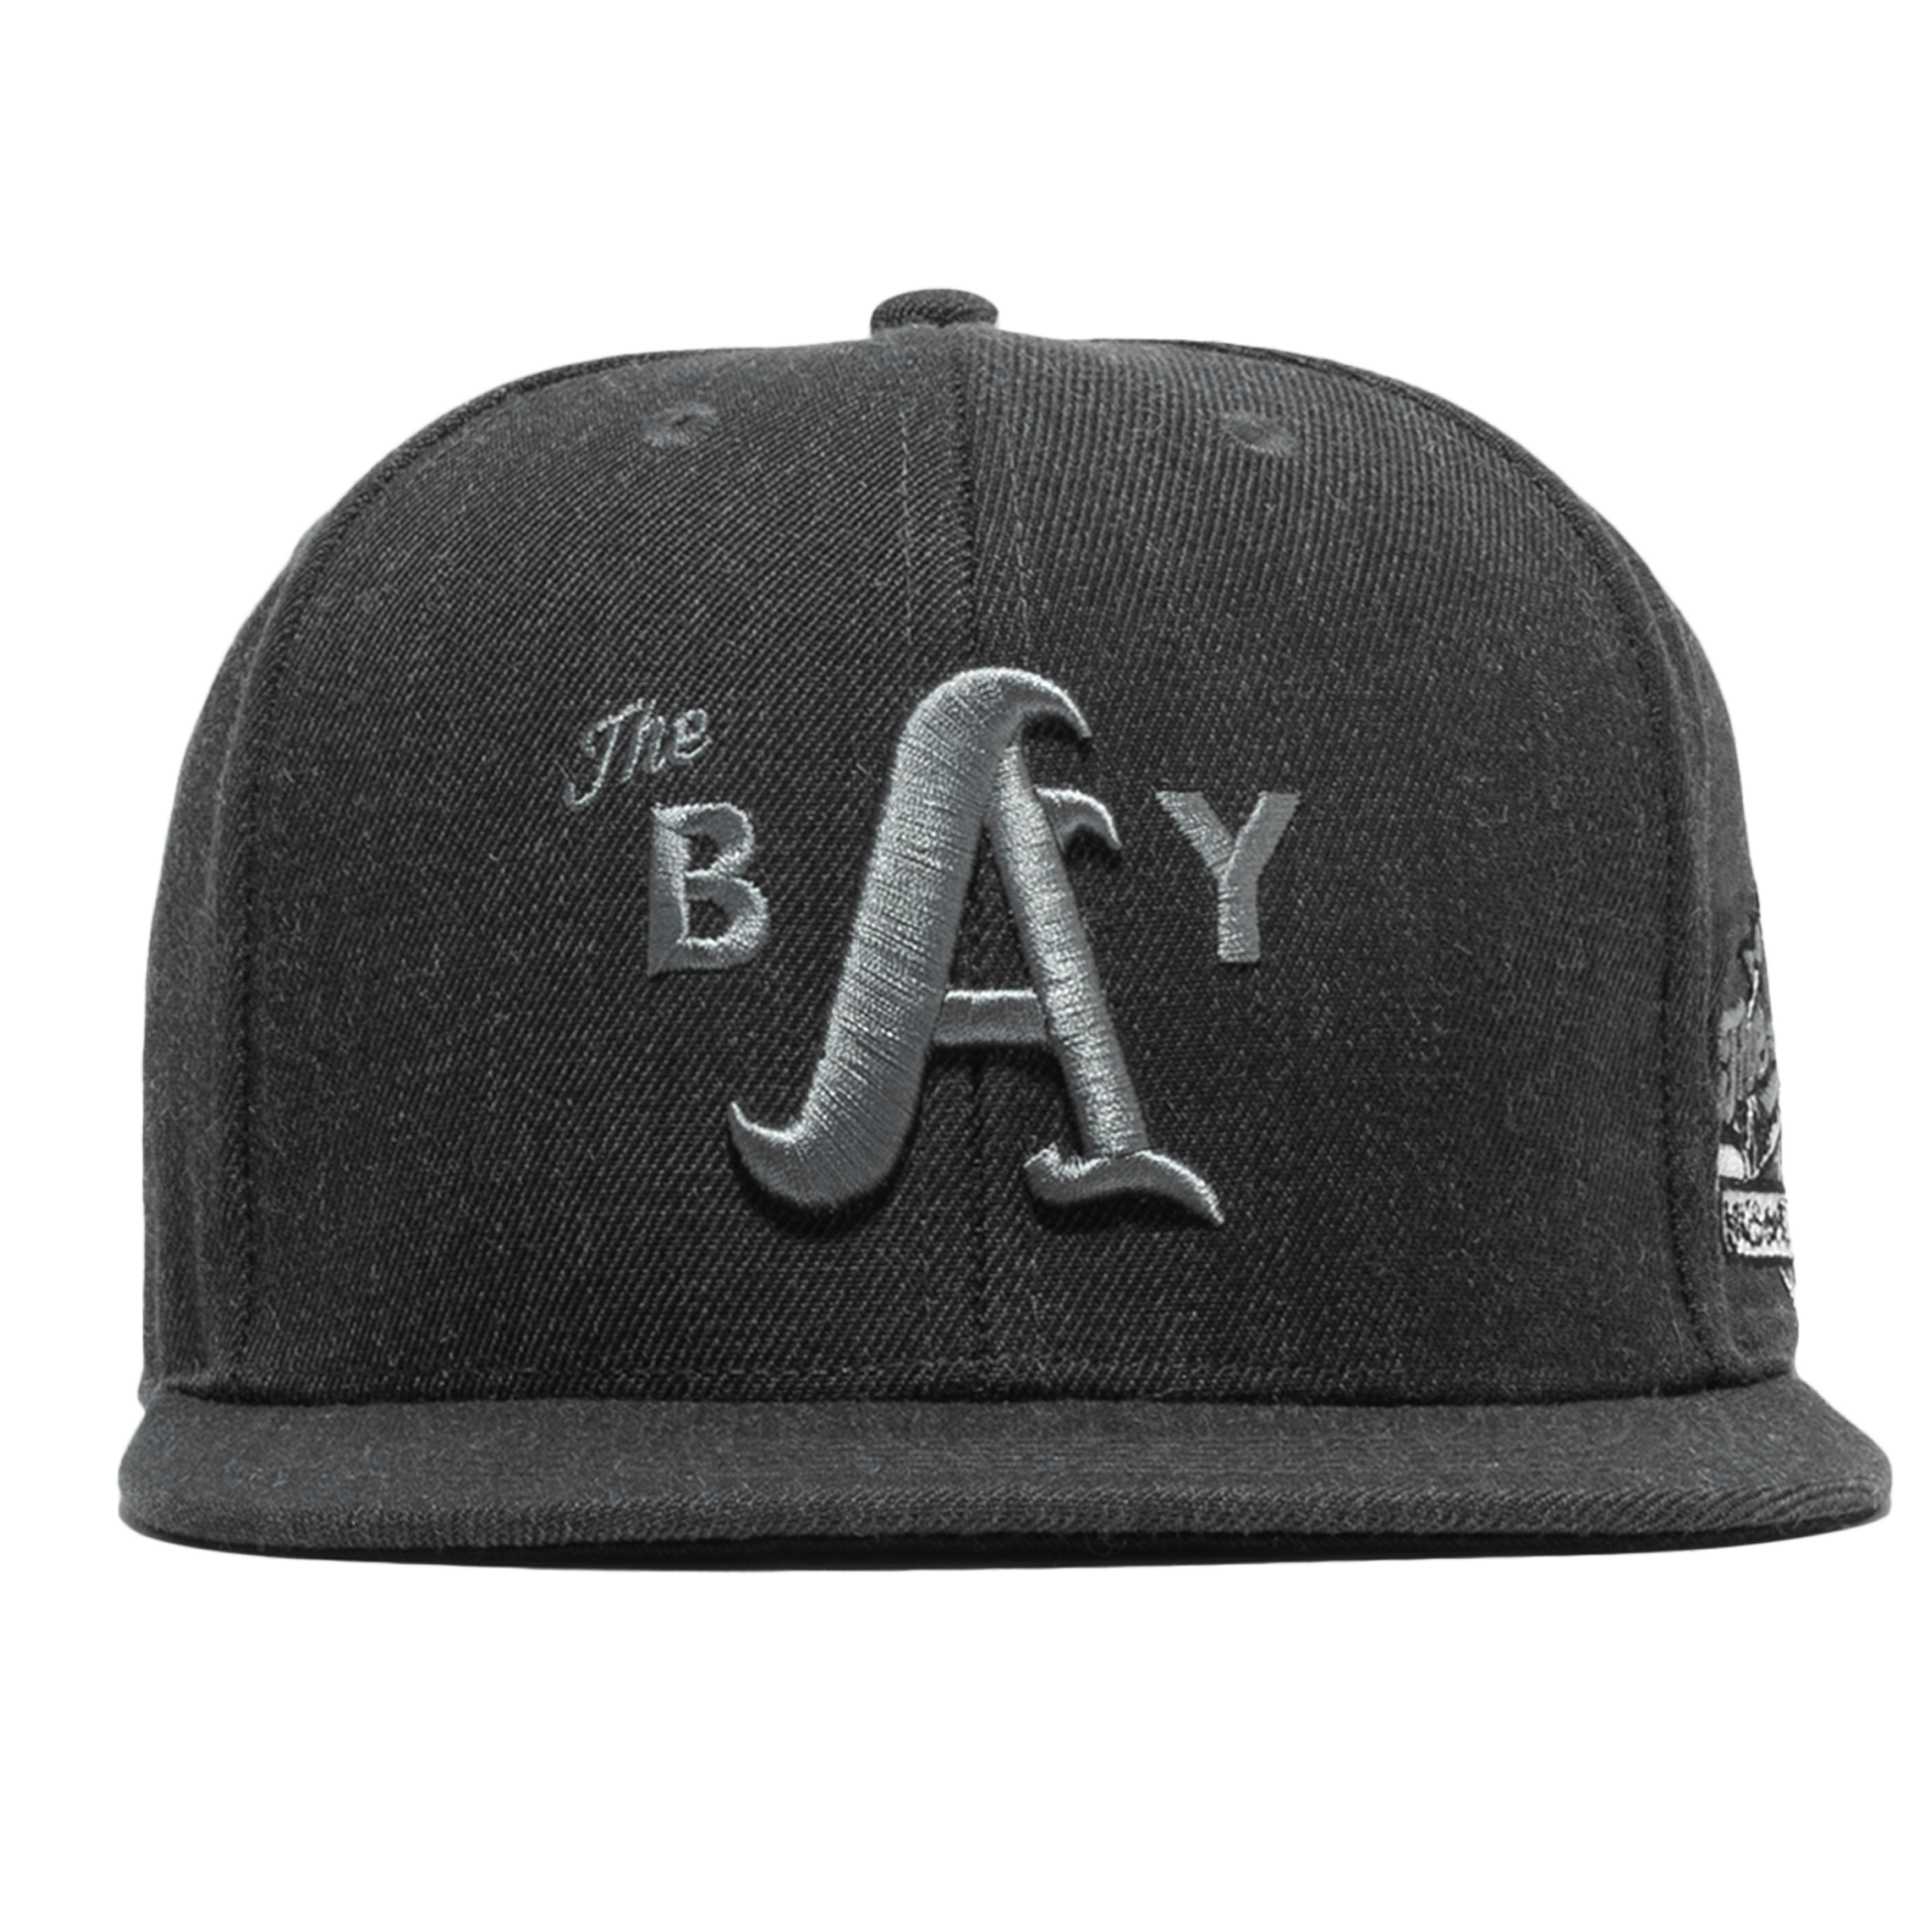 Front view of a Charcoal hat with 3D grey embroidered The Bay logo on the crown and square flat bill.